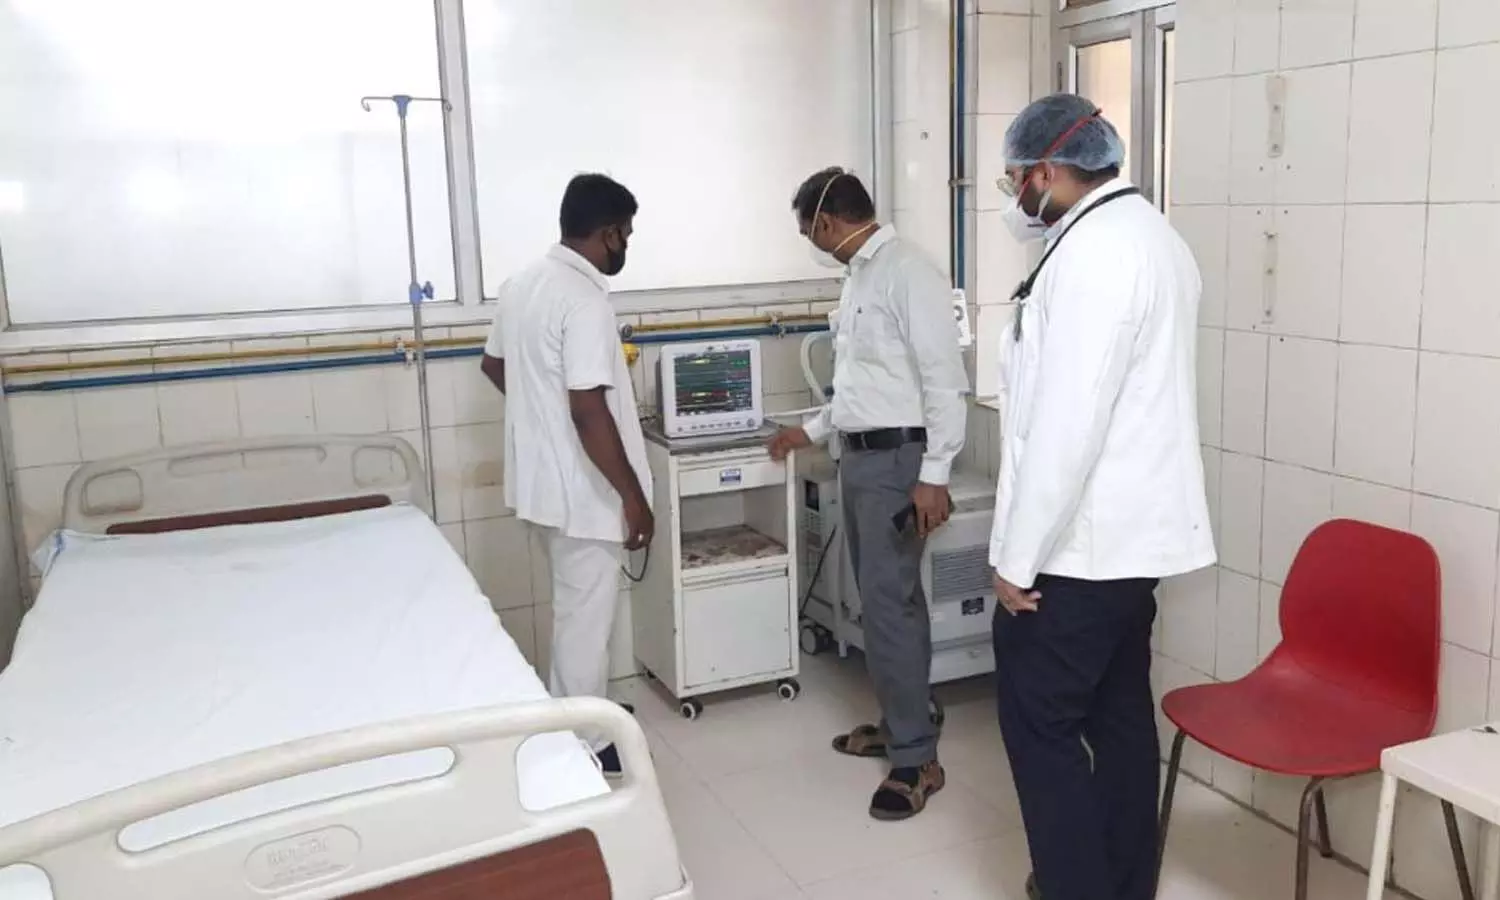 Monkeypox ward built separately on the orders of the Chief Minister in Prayagraj, modern machines and doctors deployed